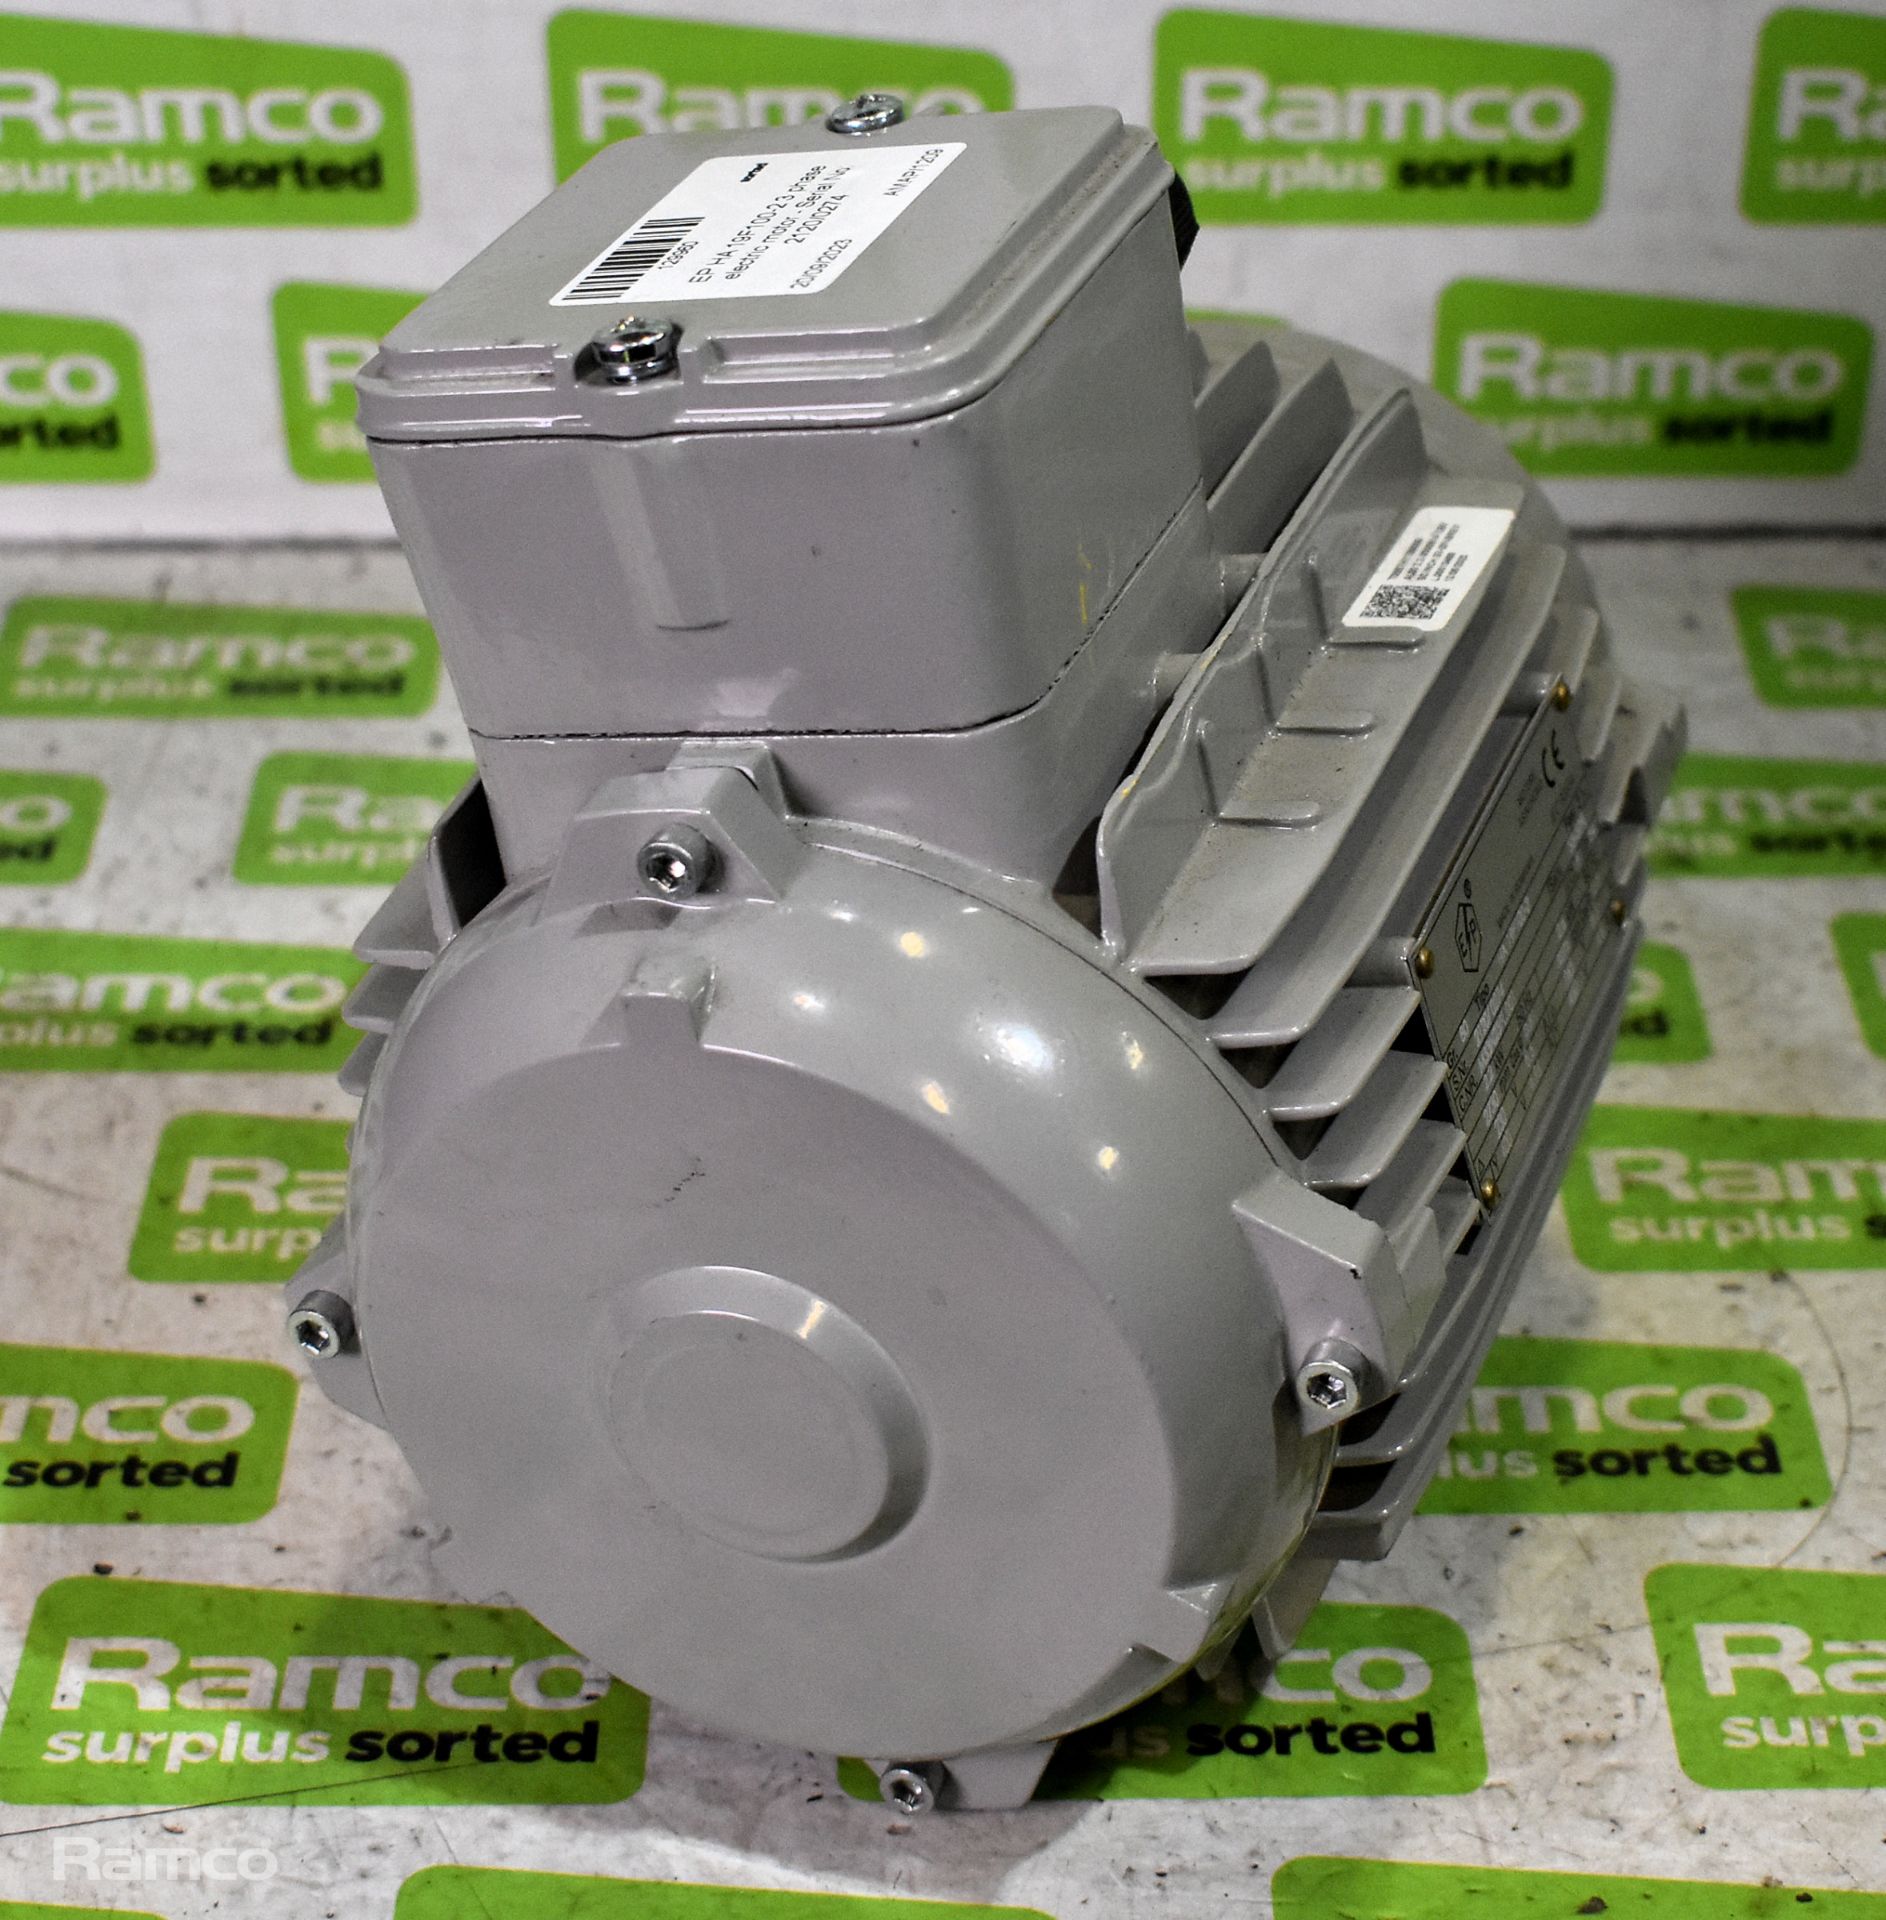 EP HA 19F100-2 3 phase electric motor - Serial No: 2120/0274 - Image 5 of 5